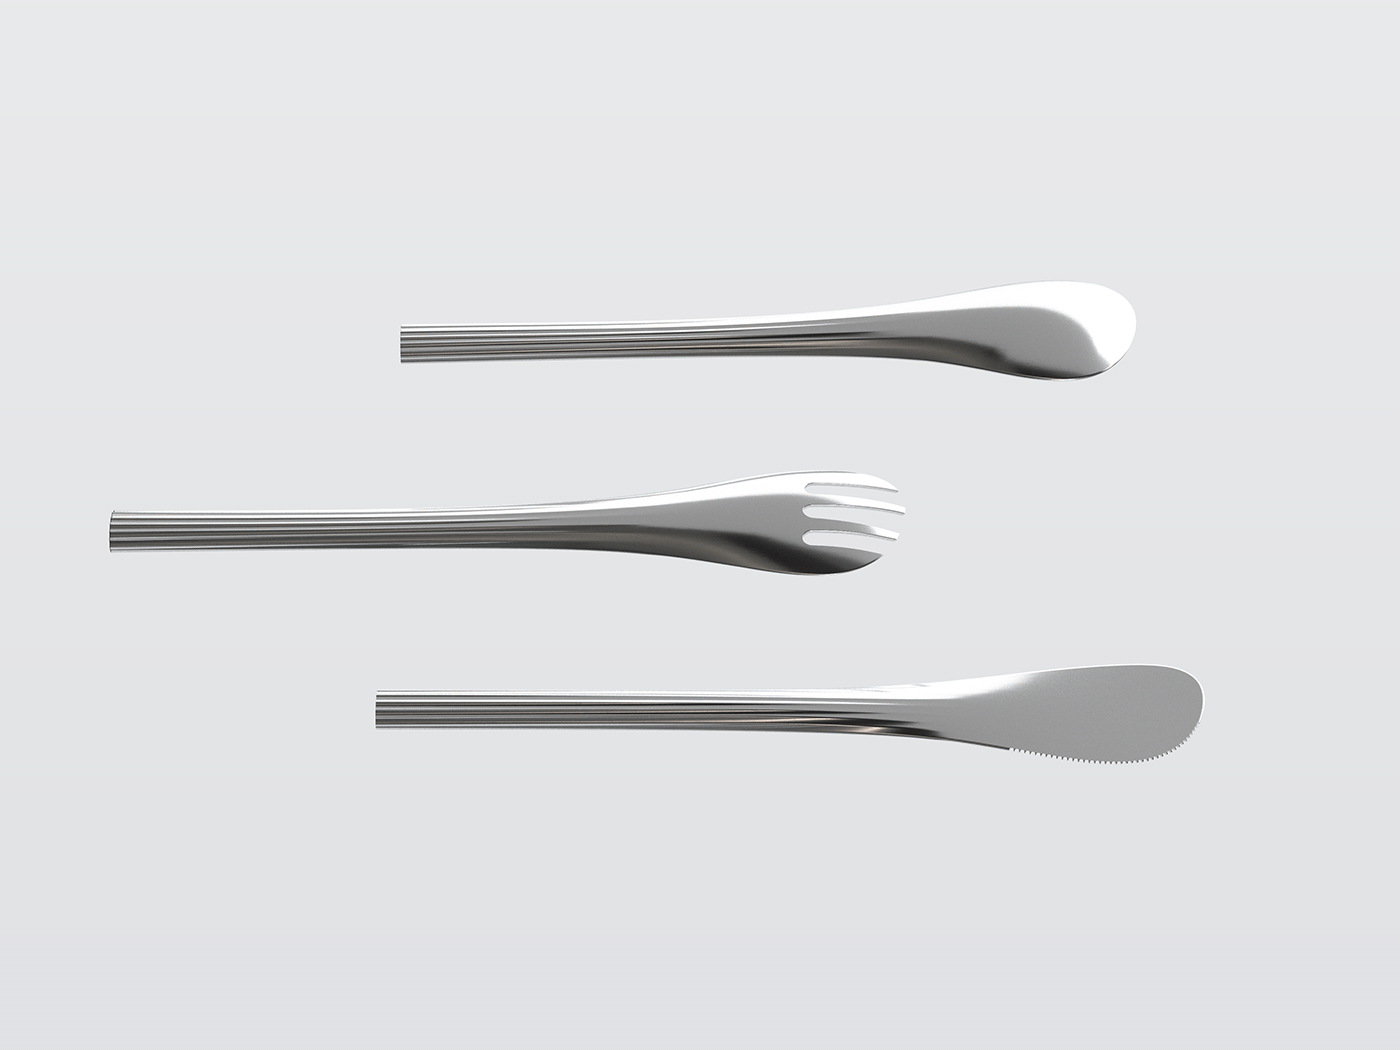 biomimicry craft craftsmanship cutlery cutlery design fork Knift product design  spoon tableware